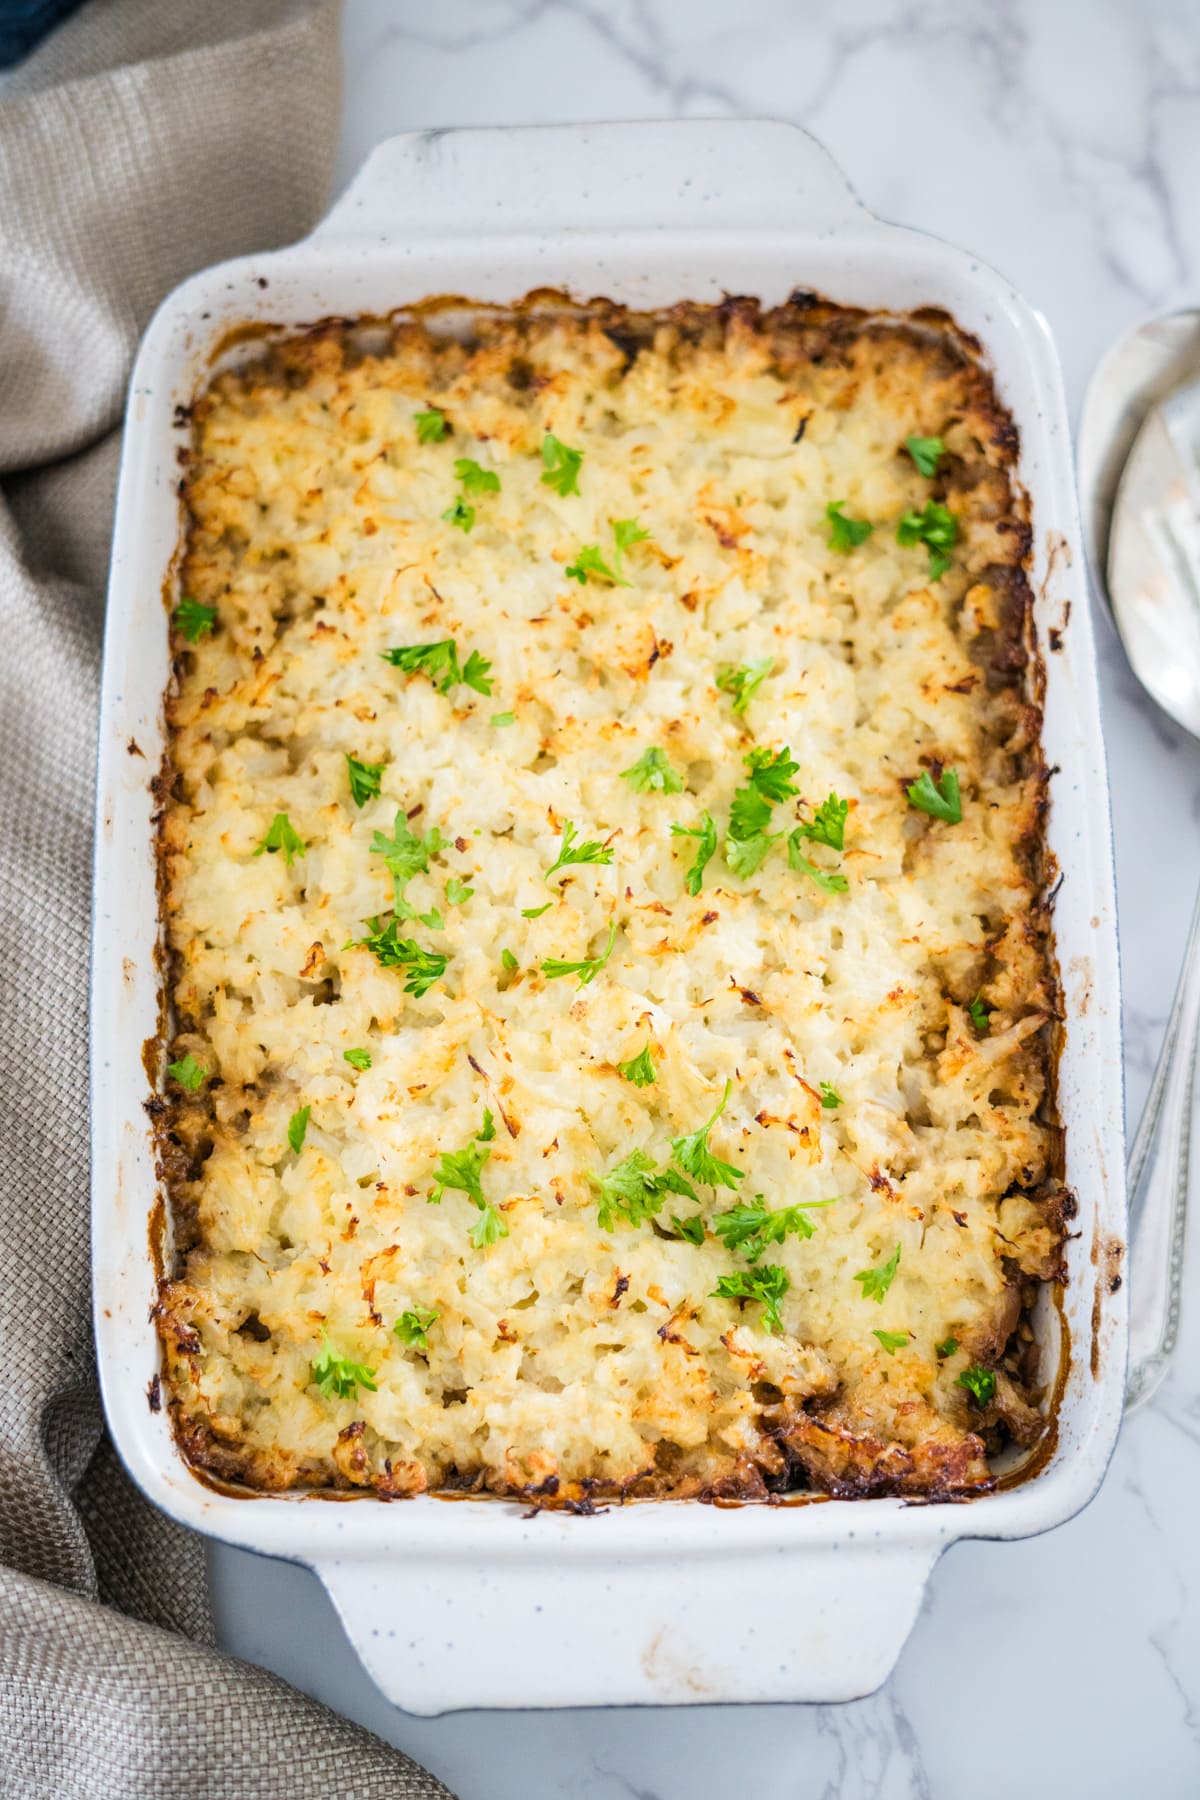 A mushroom and leek cottage pie with mashed potatoes and parsley.